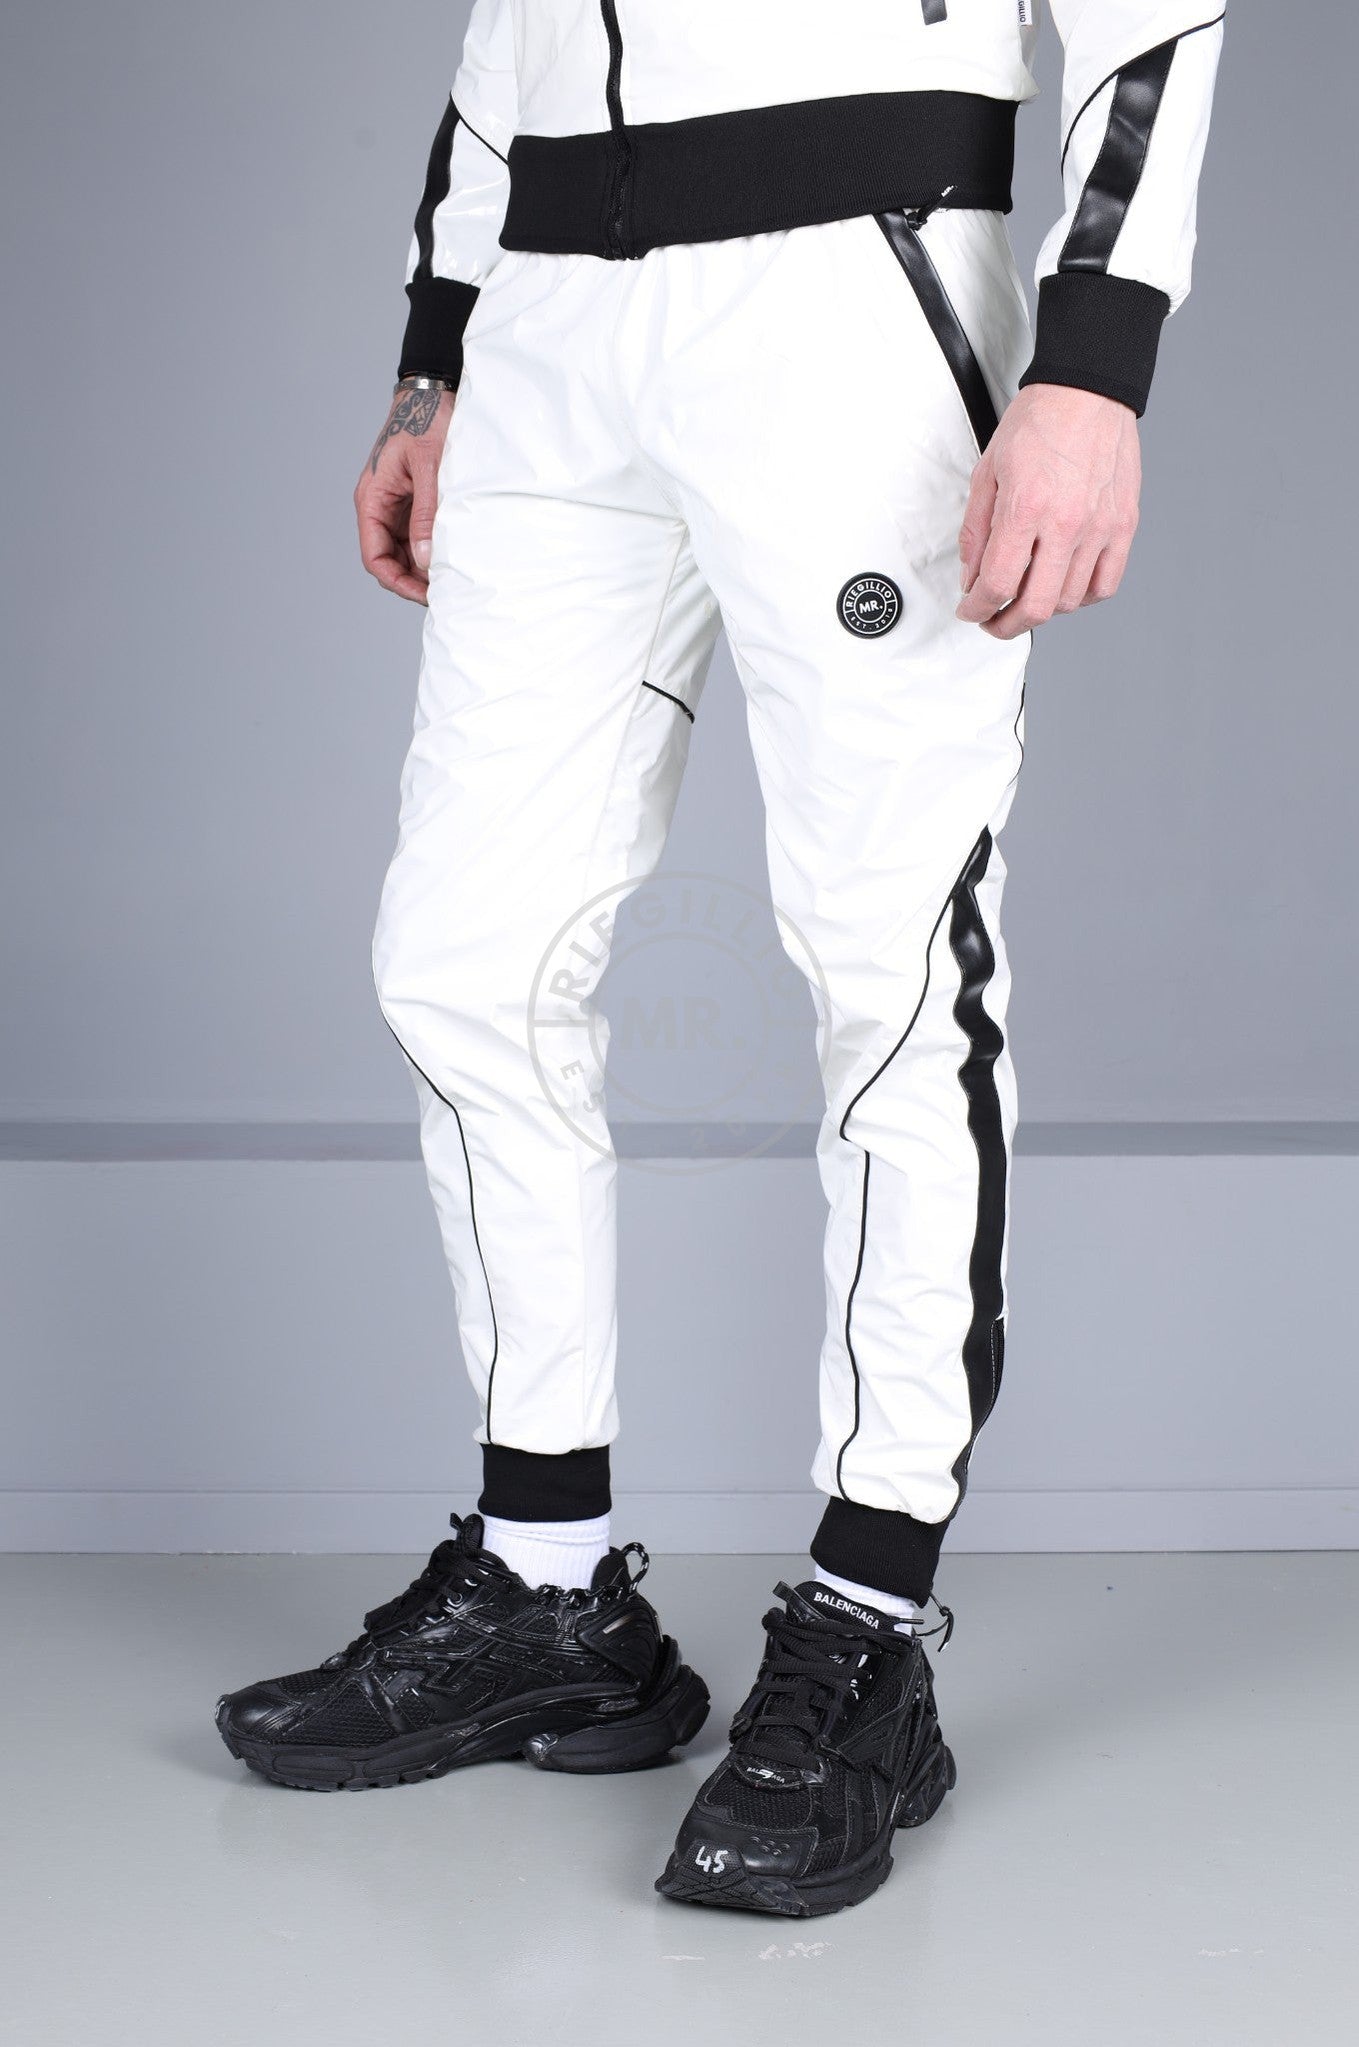 PVC 24 Tracksuit Pants - White with Black Piping-at MR. Riegillio